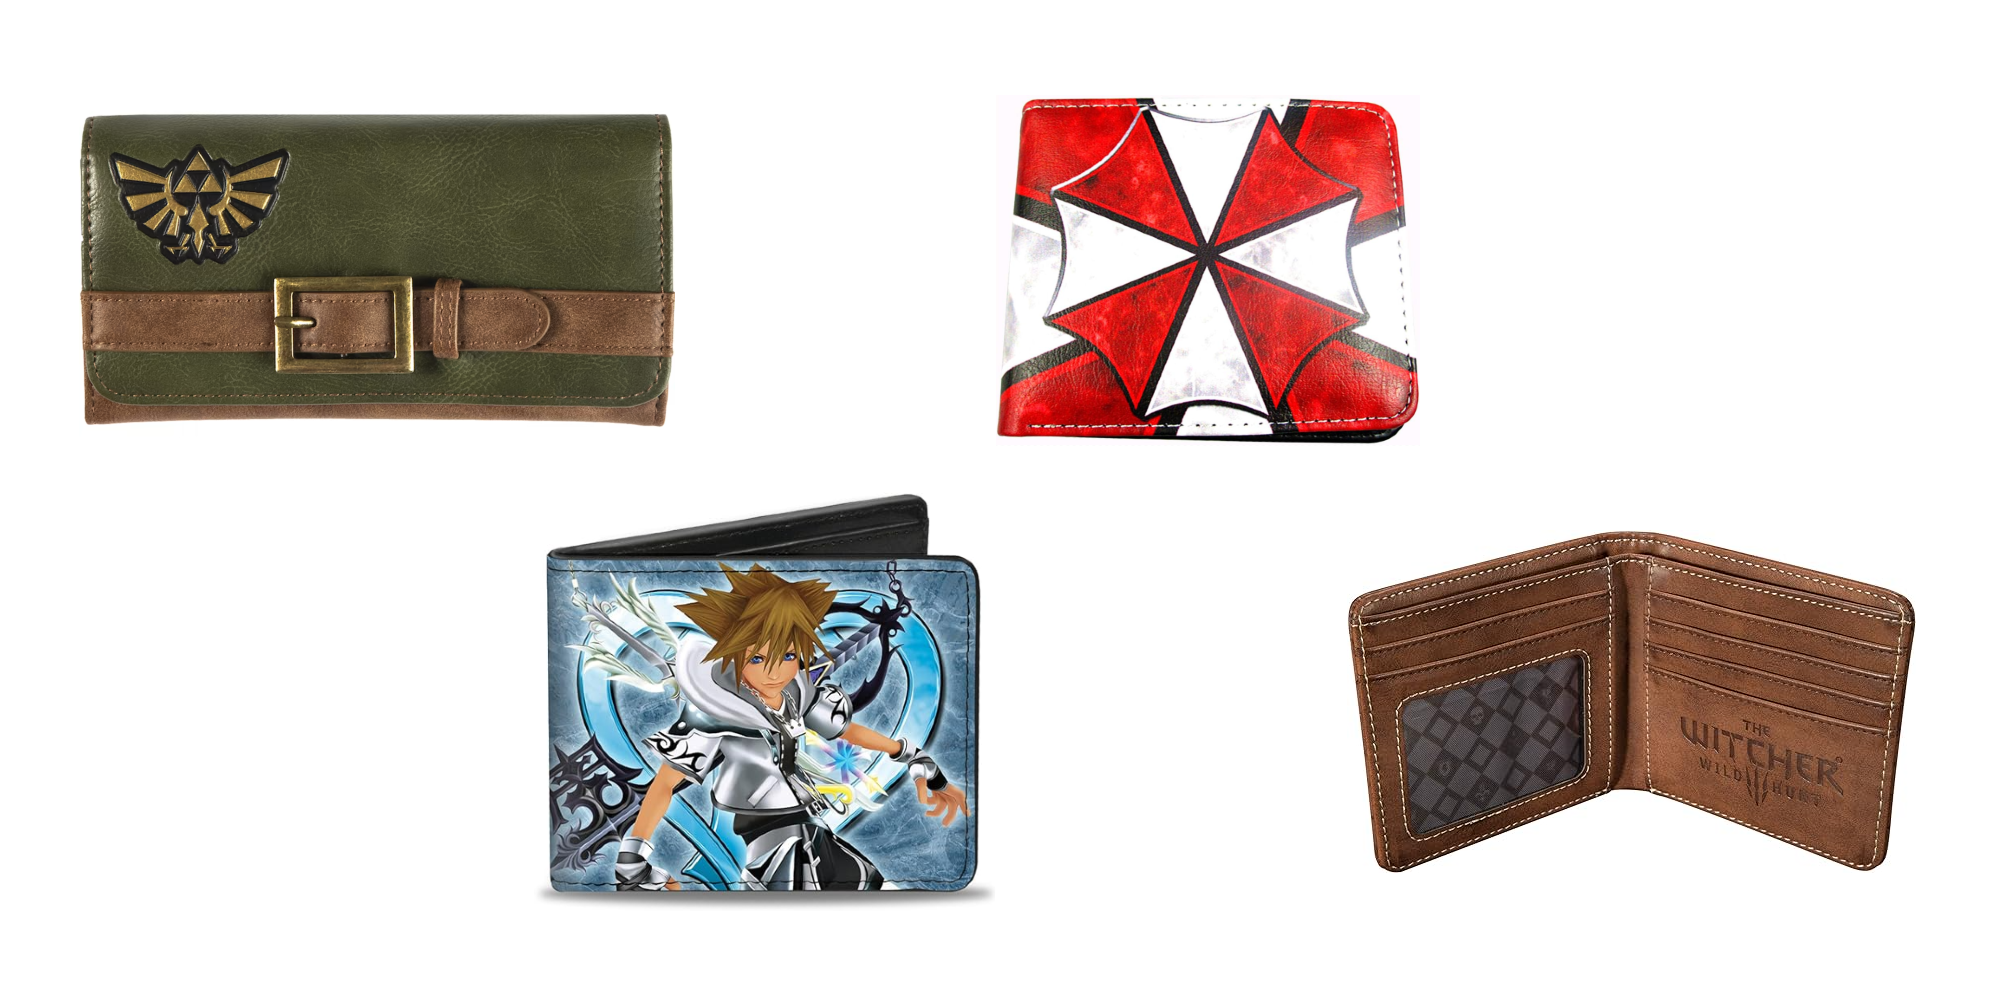 Header image for Best Gaming Wallets featuring images of Zelda, Kingdom Hearts 2, Resident Evil, and The Witcher 3 wallets